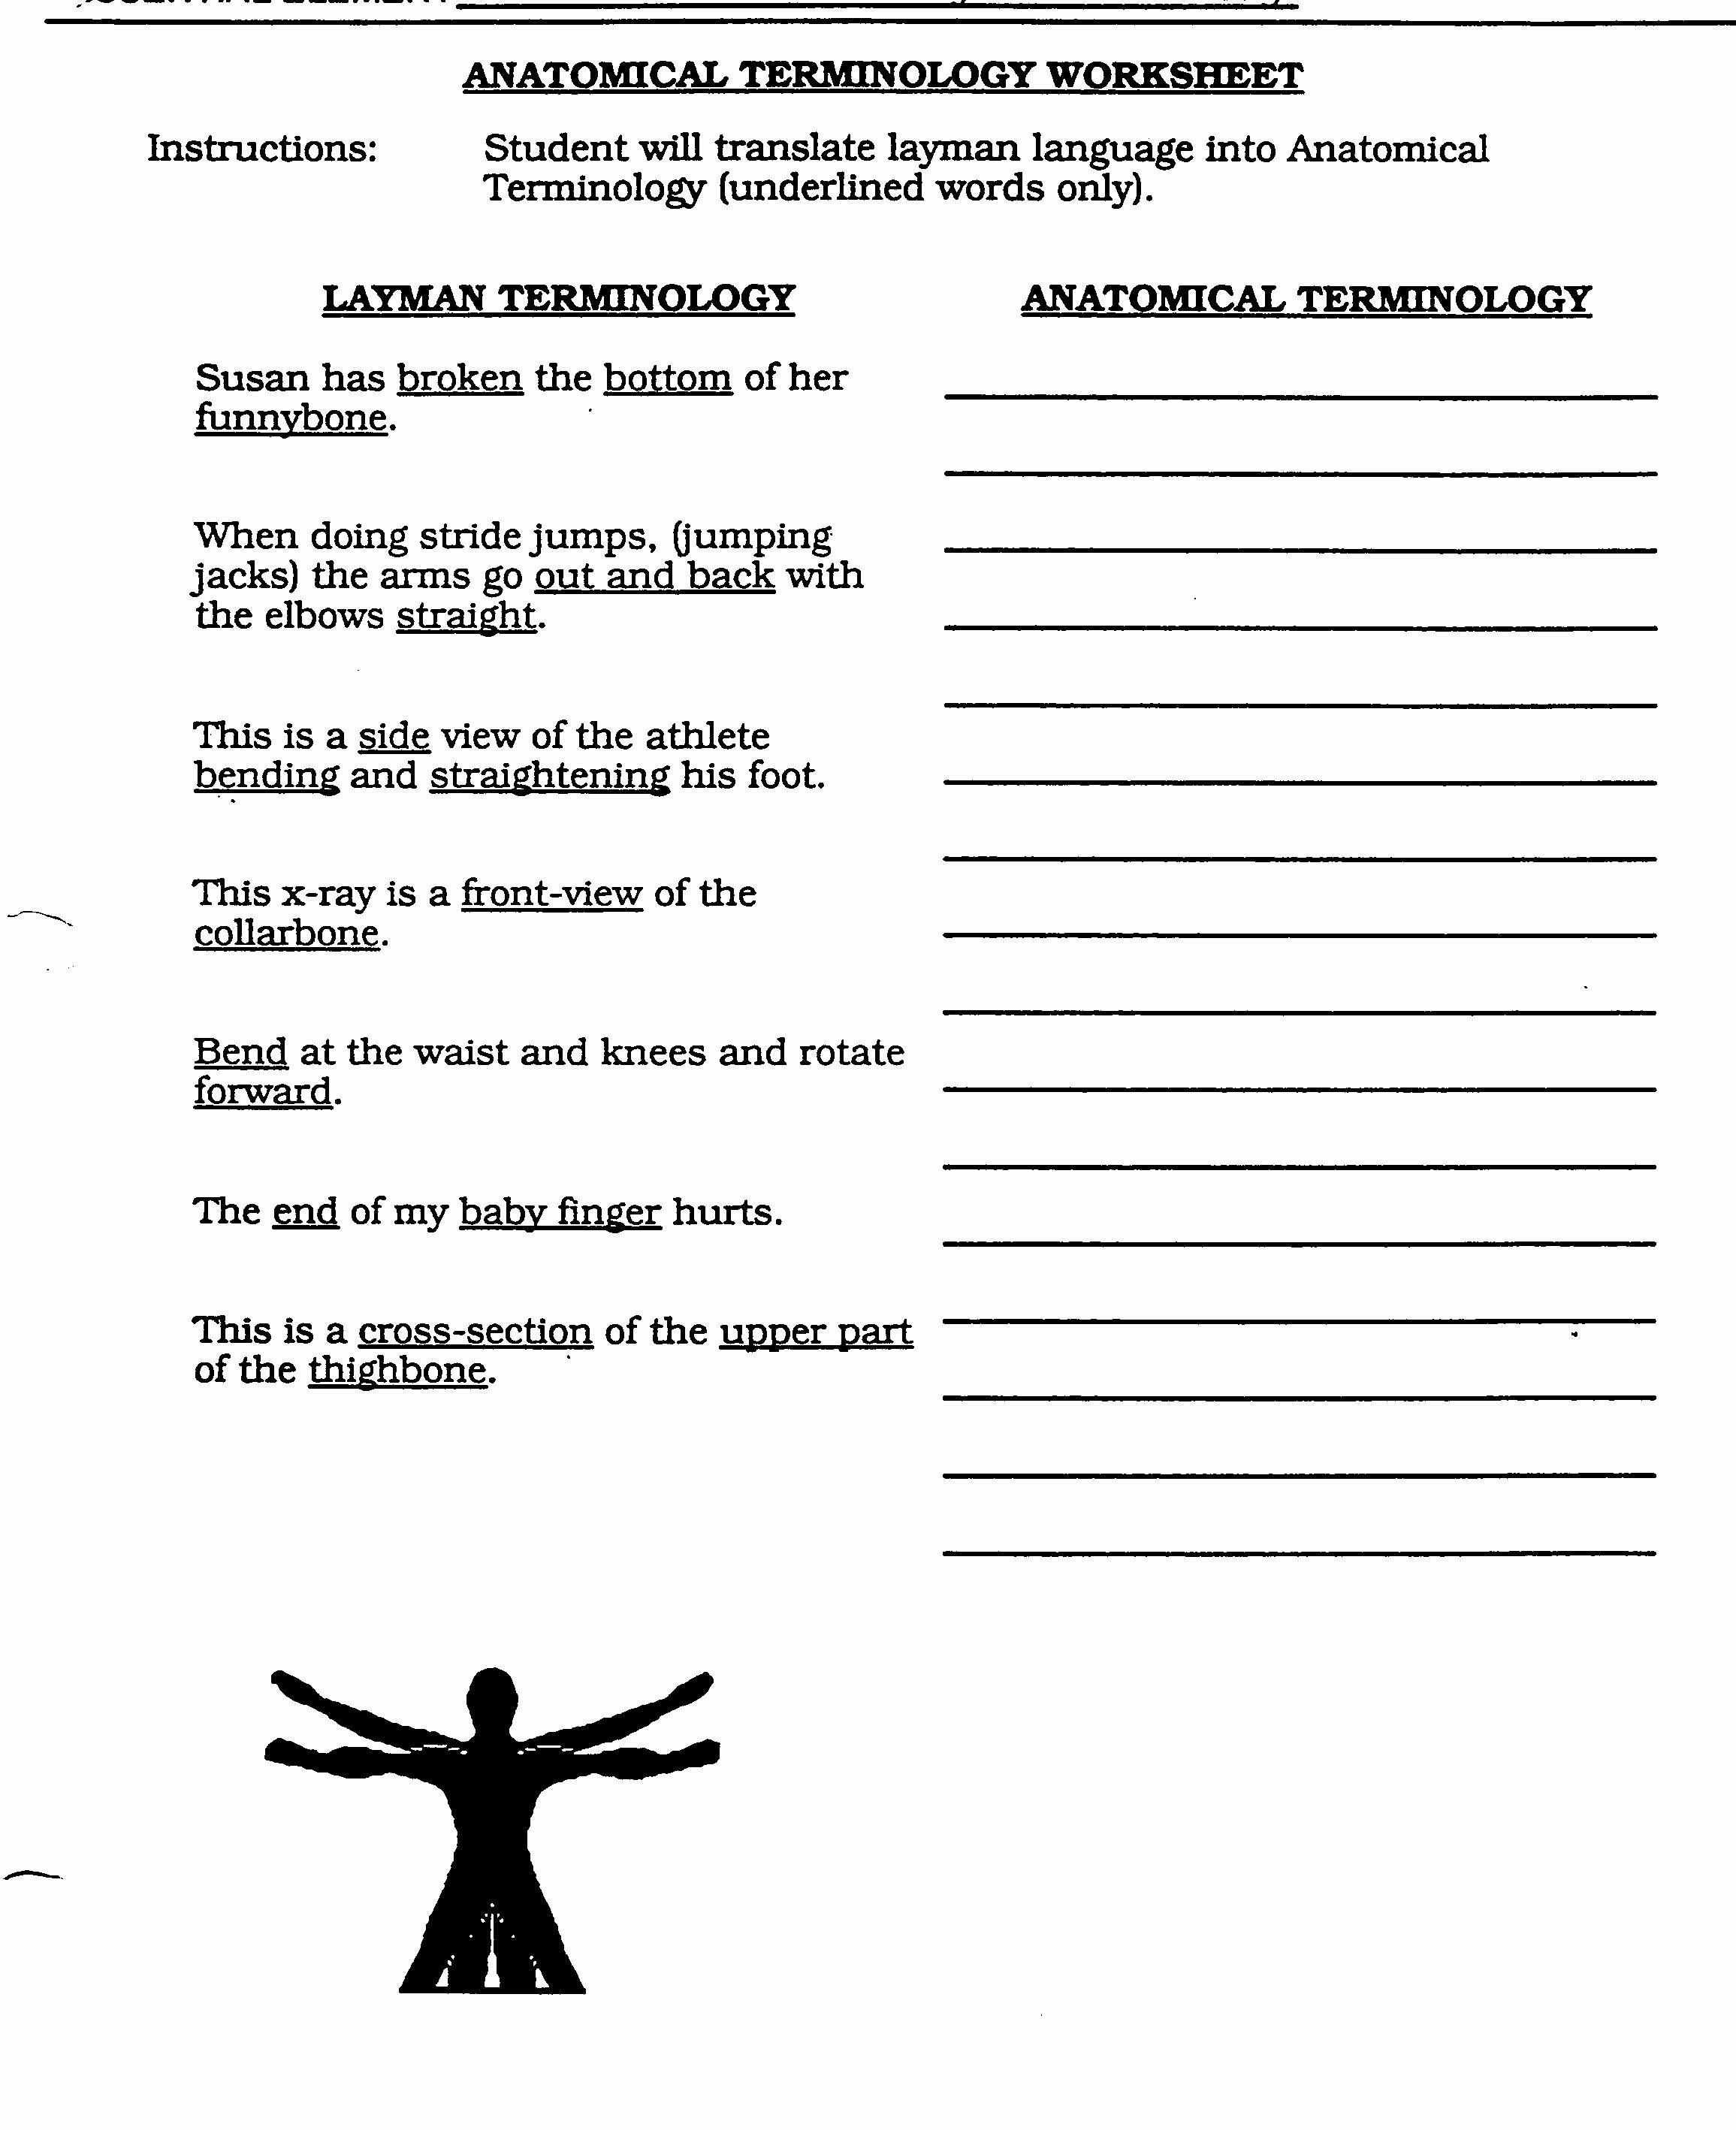 Anatomical Terms Worksheet Answers Best Of Index [mailgc On]